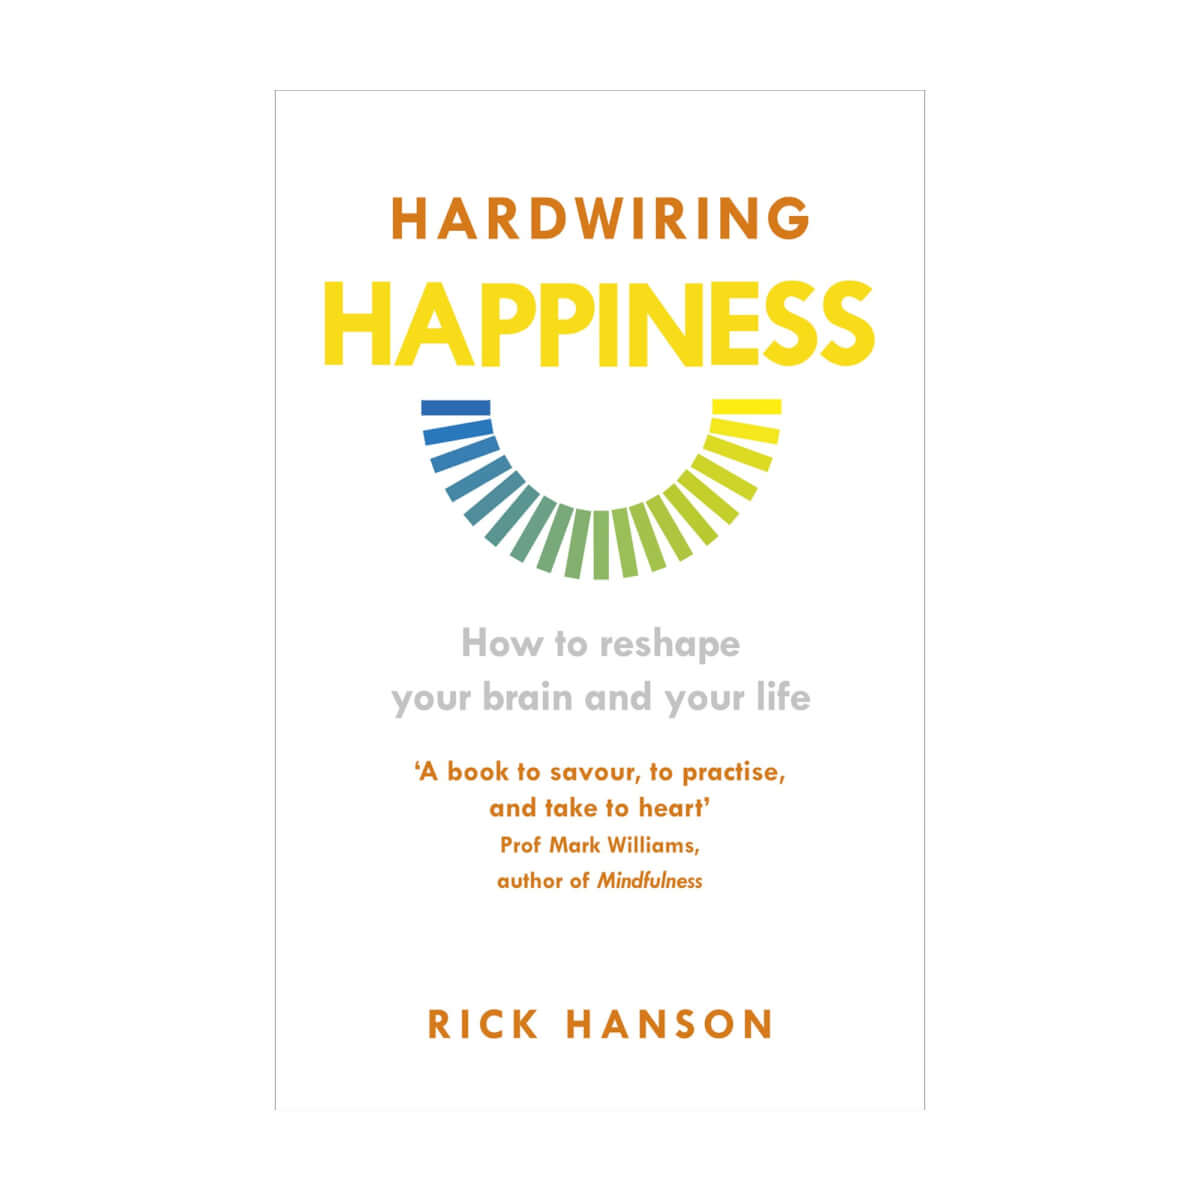 wellness and beauty Hardwiring Happiness 200g | £5.49 (Sale price)